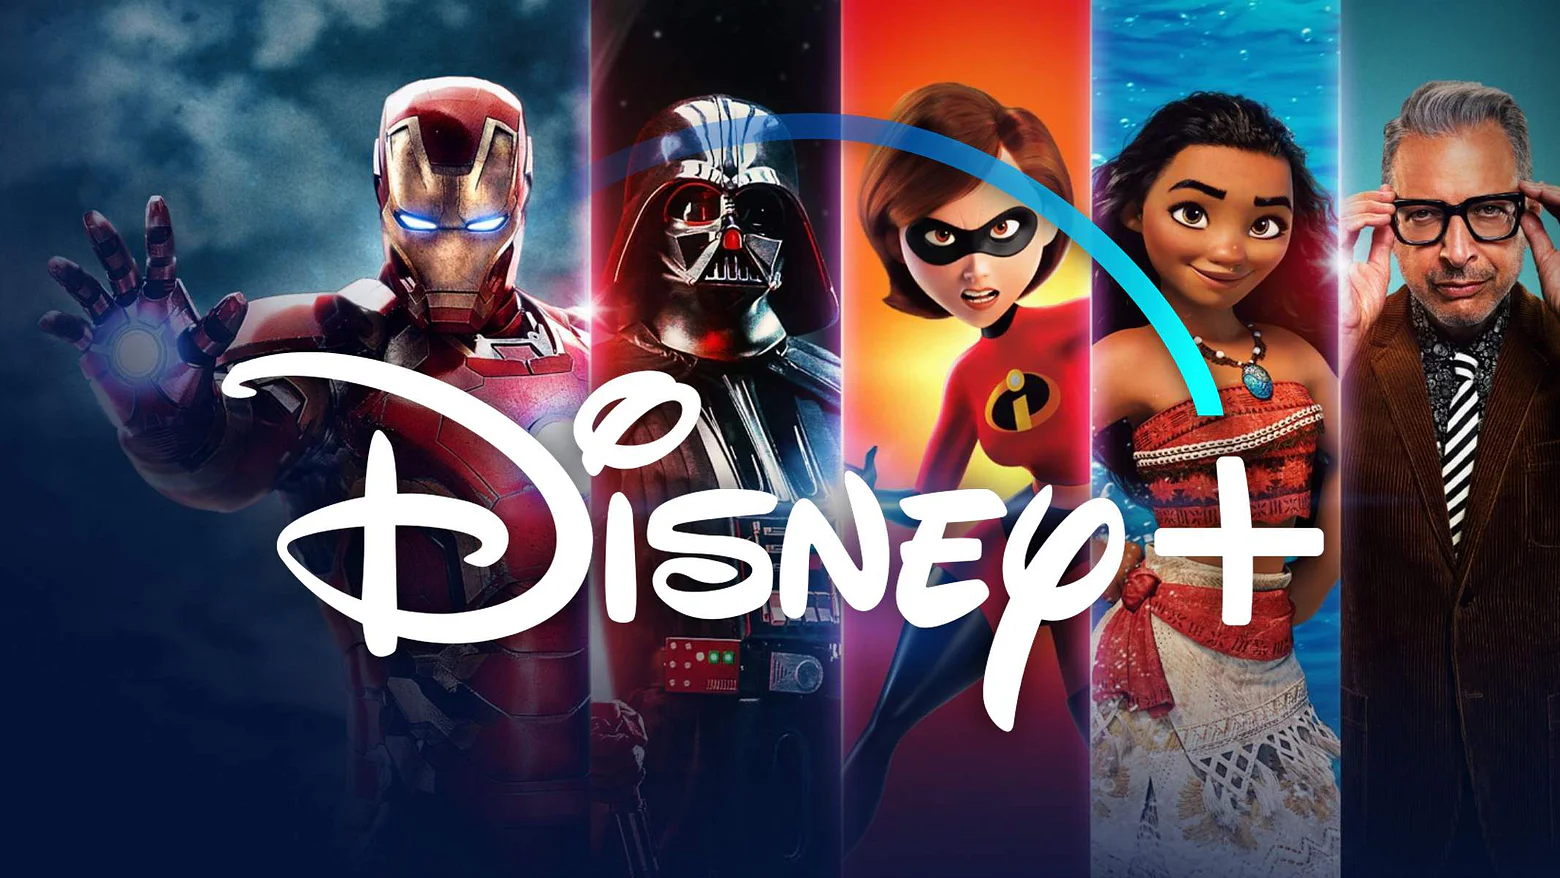 Which are the latest shows to watch on Disney+ Hotstar? Let’s find out!